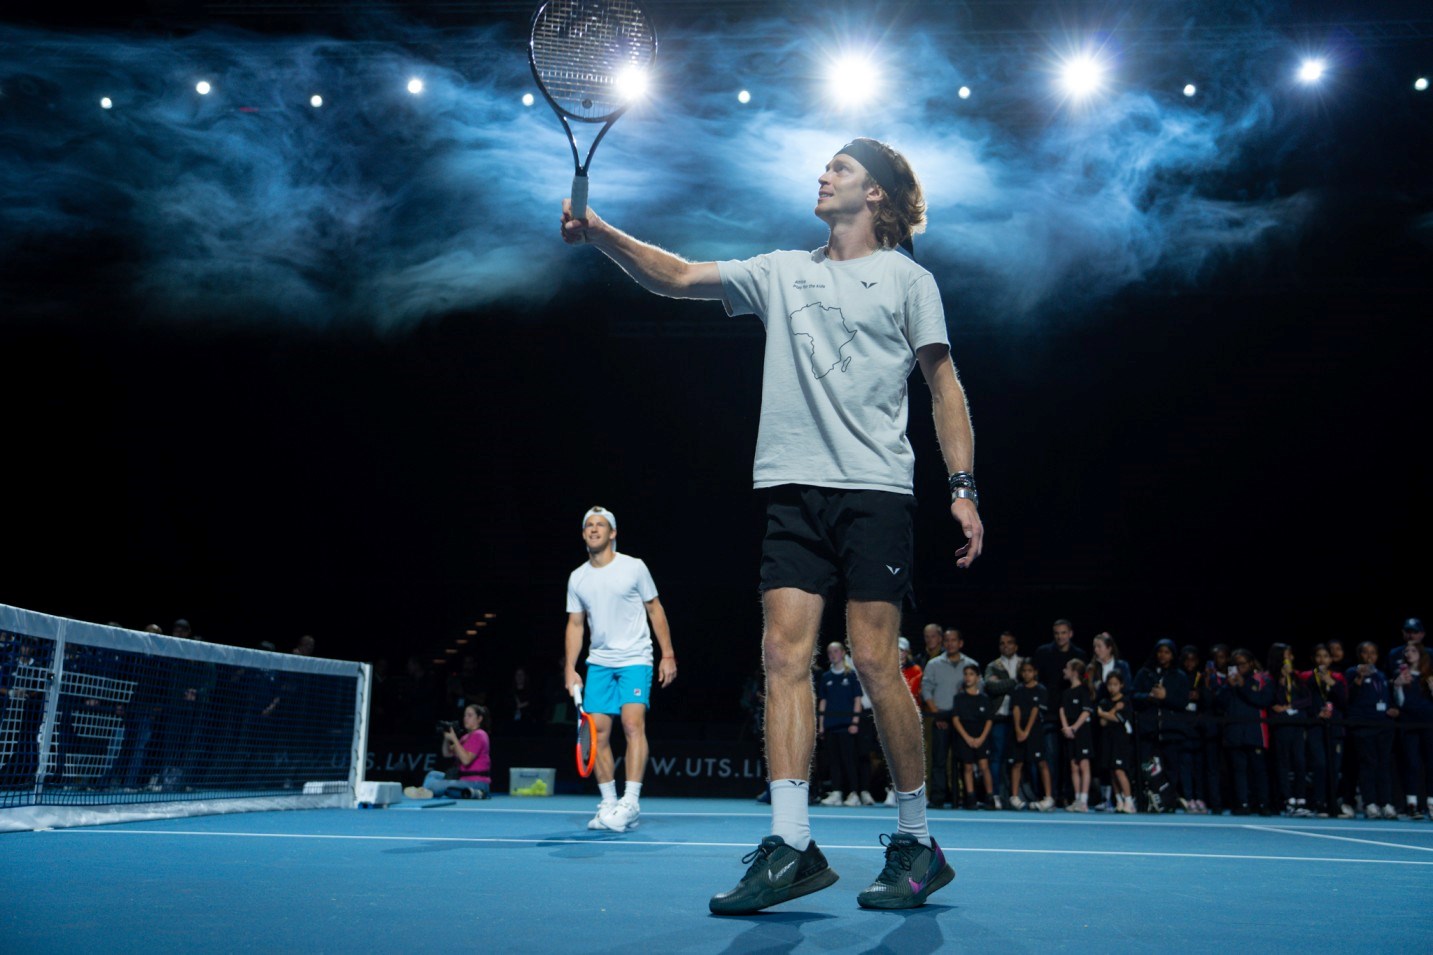 Tennis player Andrey Rublev stood on court at the Ultimate Tennis Showdown, holding his racket up to the sky while ball kids look on at him